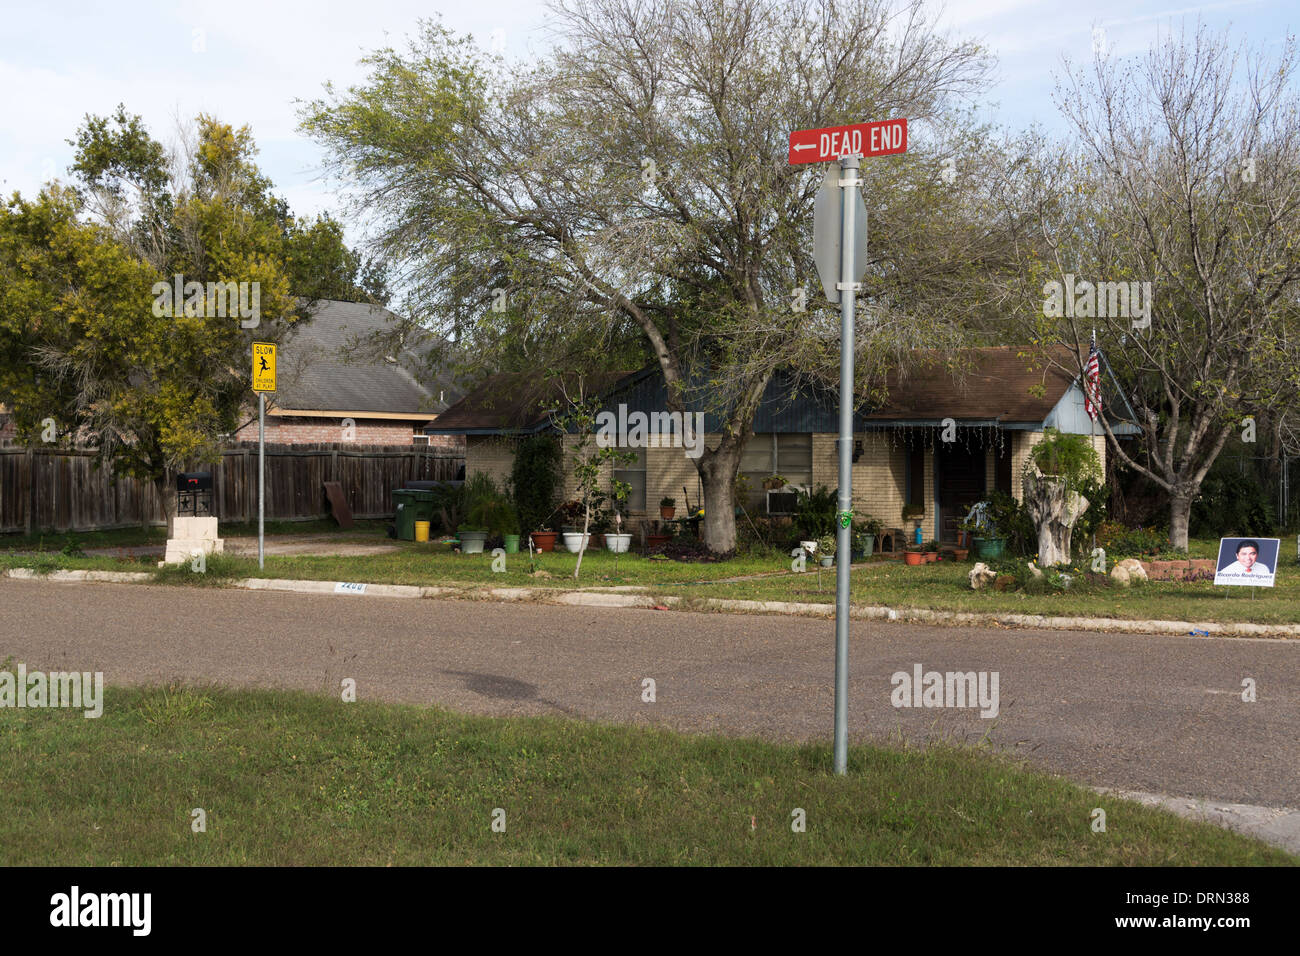 Neighborhood street signs: Slow, Children Playing and Dead End. Stock Photo